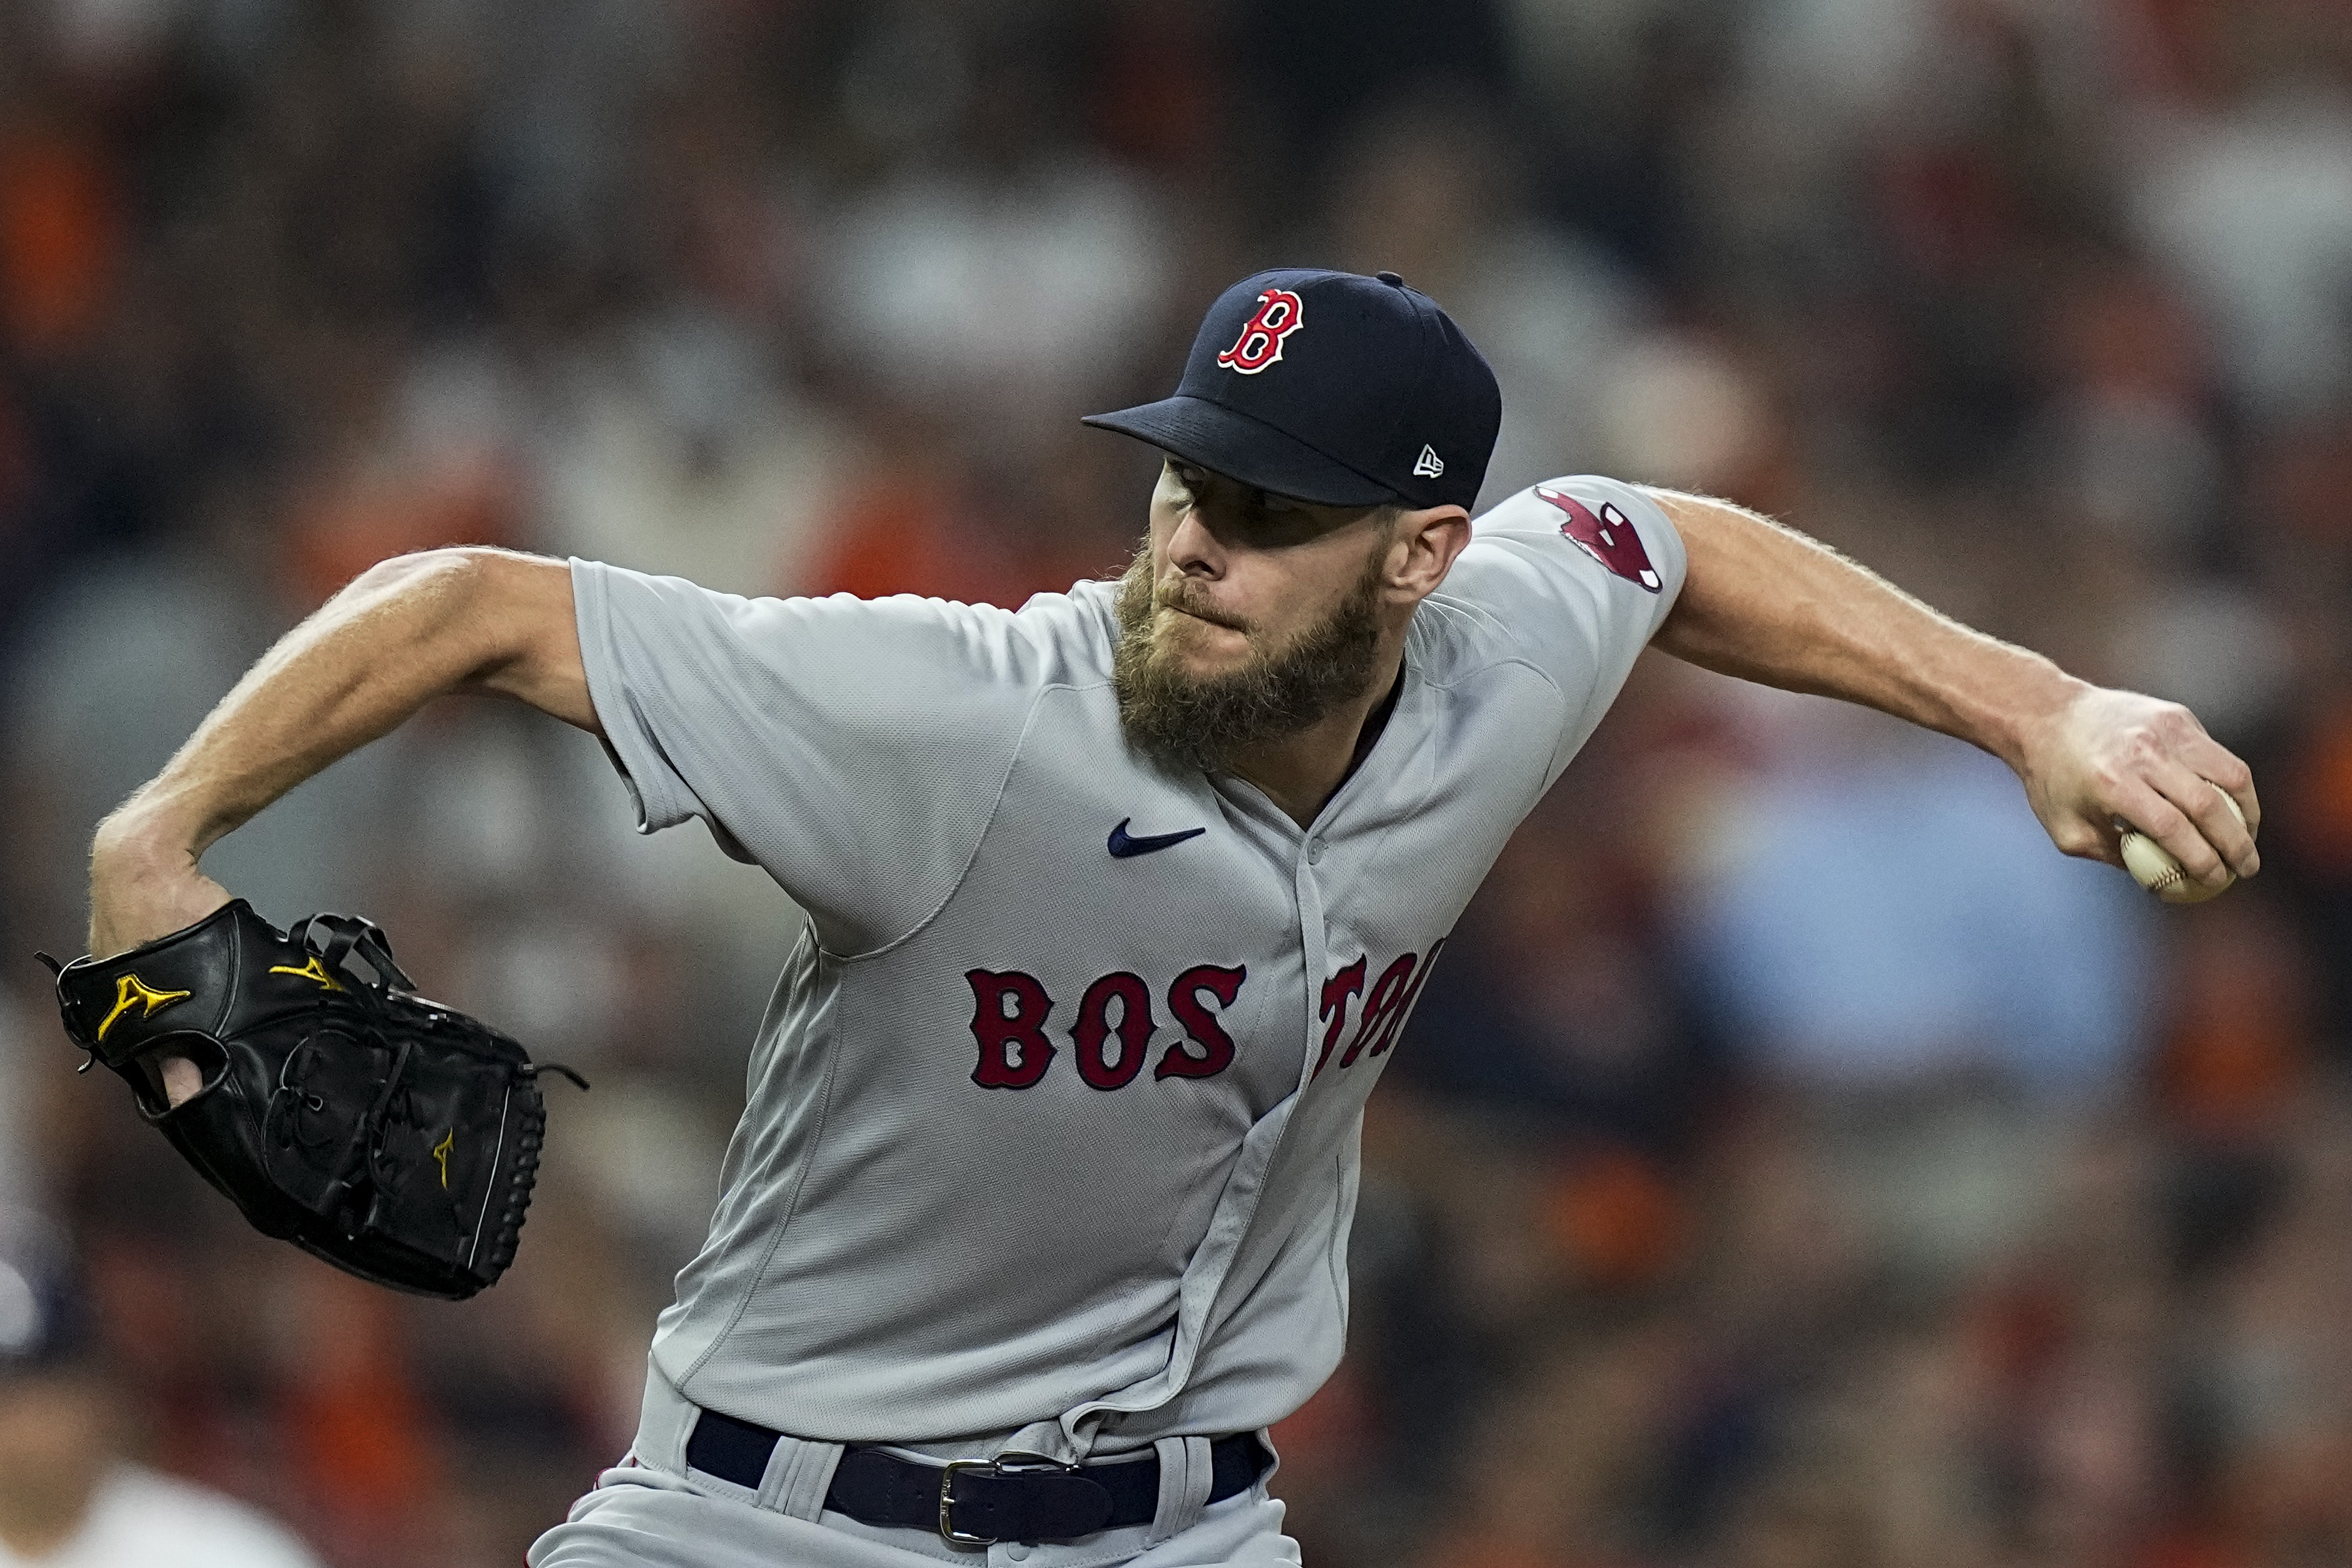 MLB playoffs: Chris Sale will start for Red Sox in Game 1 of ALCS